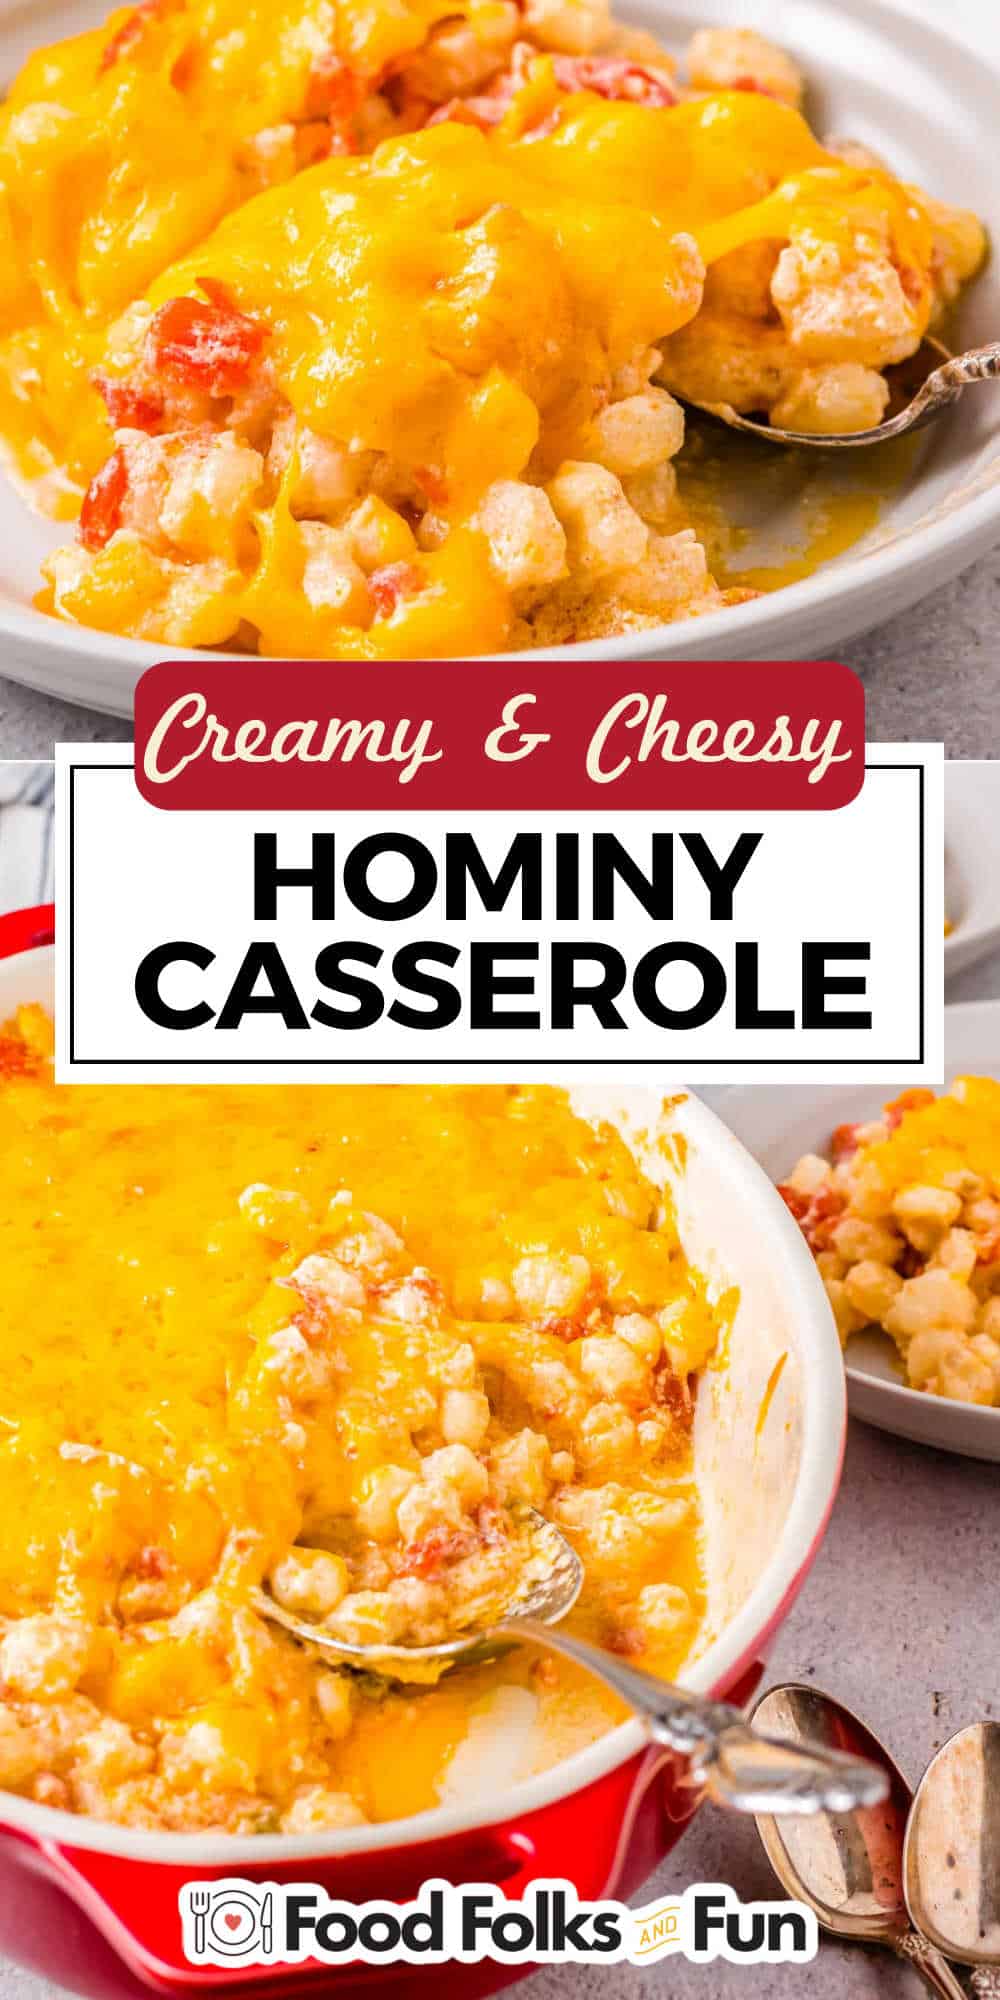 This Hominy Casserole is a versatile side dish that can be served with Mexican dishes and other savory dishes. It’s buttery, cheesy, and has a hint of spice, perfect for any gathering! via @foodfolksandfun